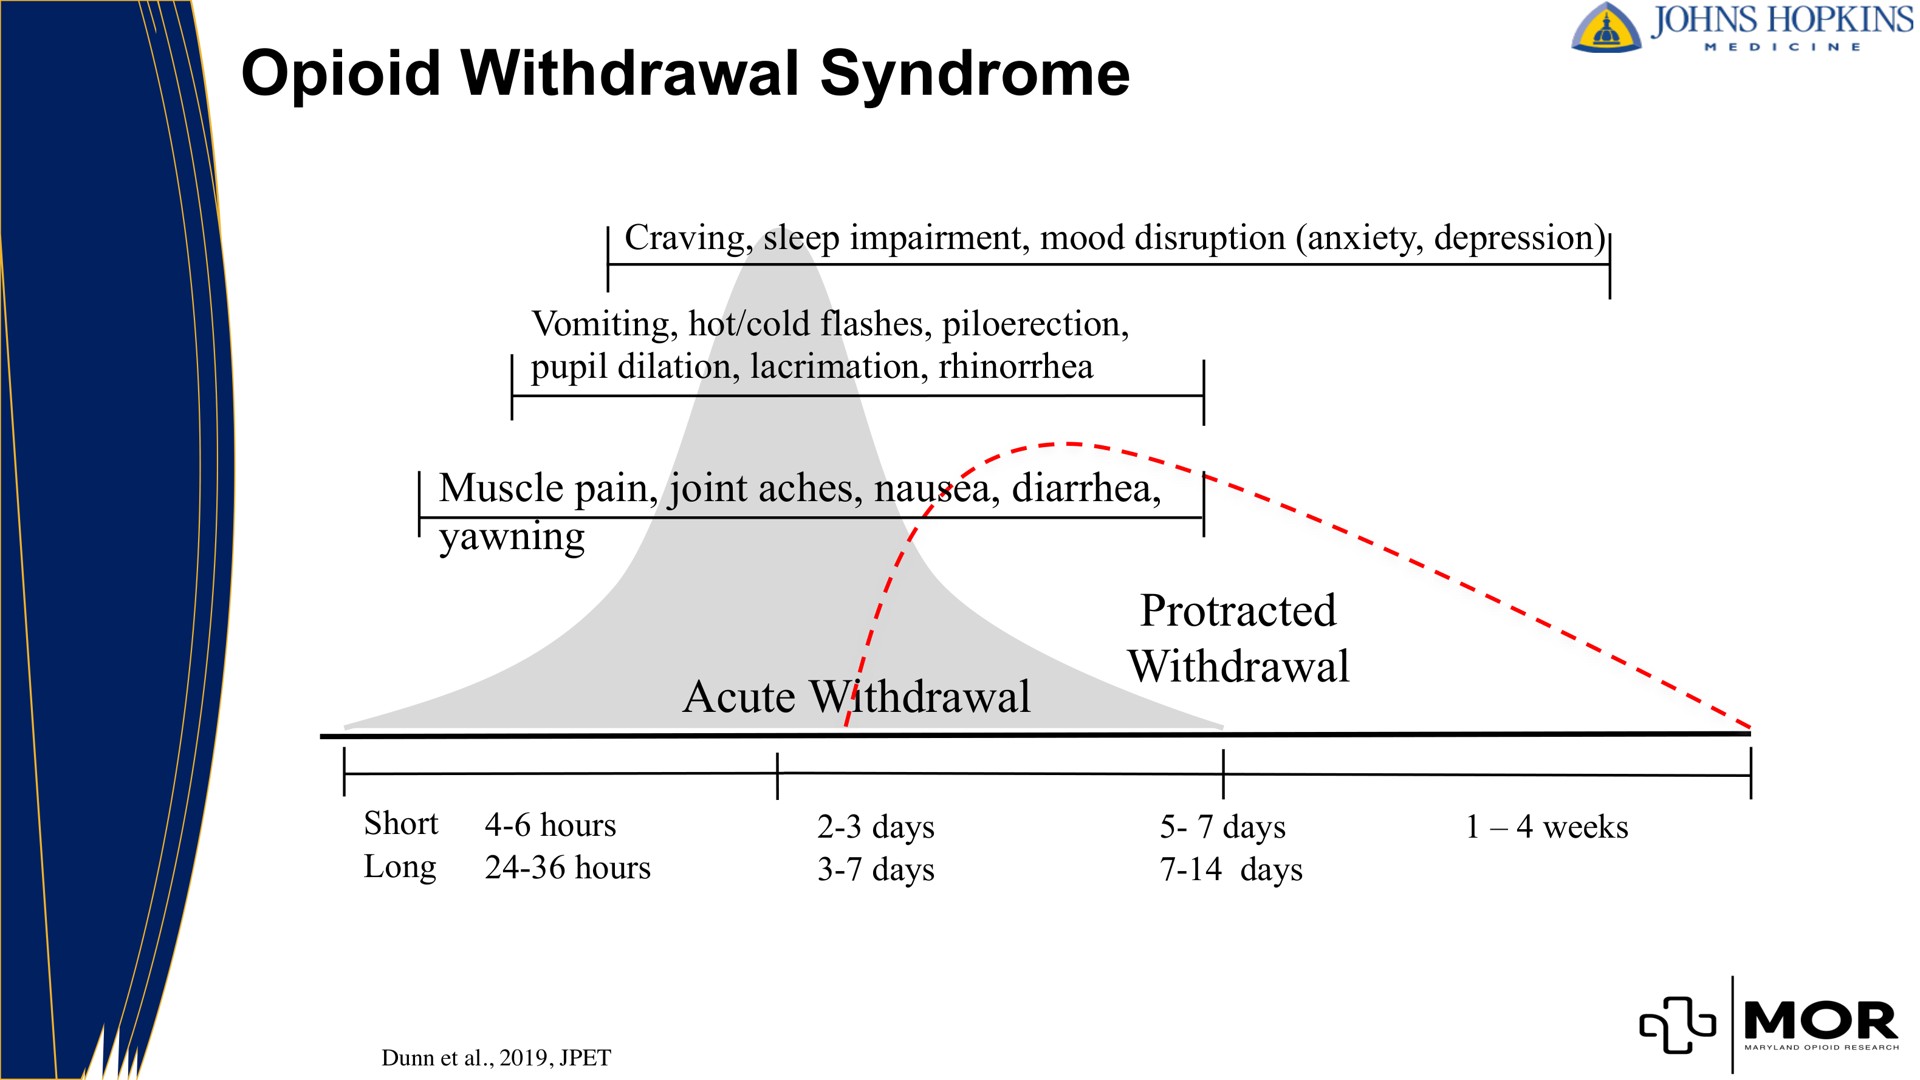 withdrawal syndrome craving sleep impairment mood disruption anxiety pression pupil dilation rhinorrhea muscle pain joint aches a diarrhea yawning acute protracted i short hours days days weeks | MindMed